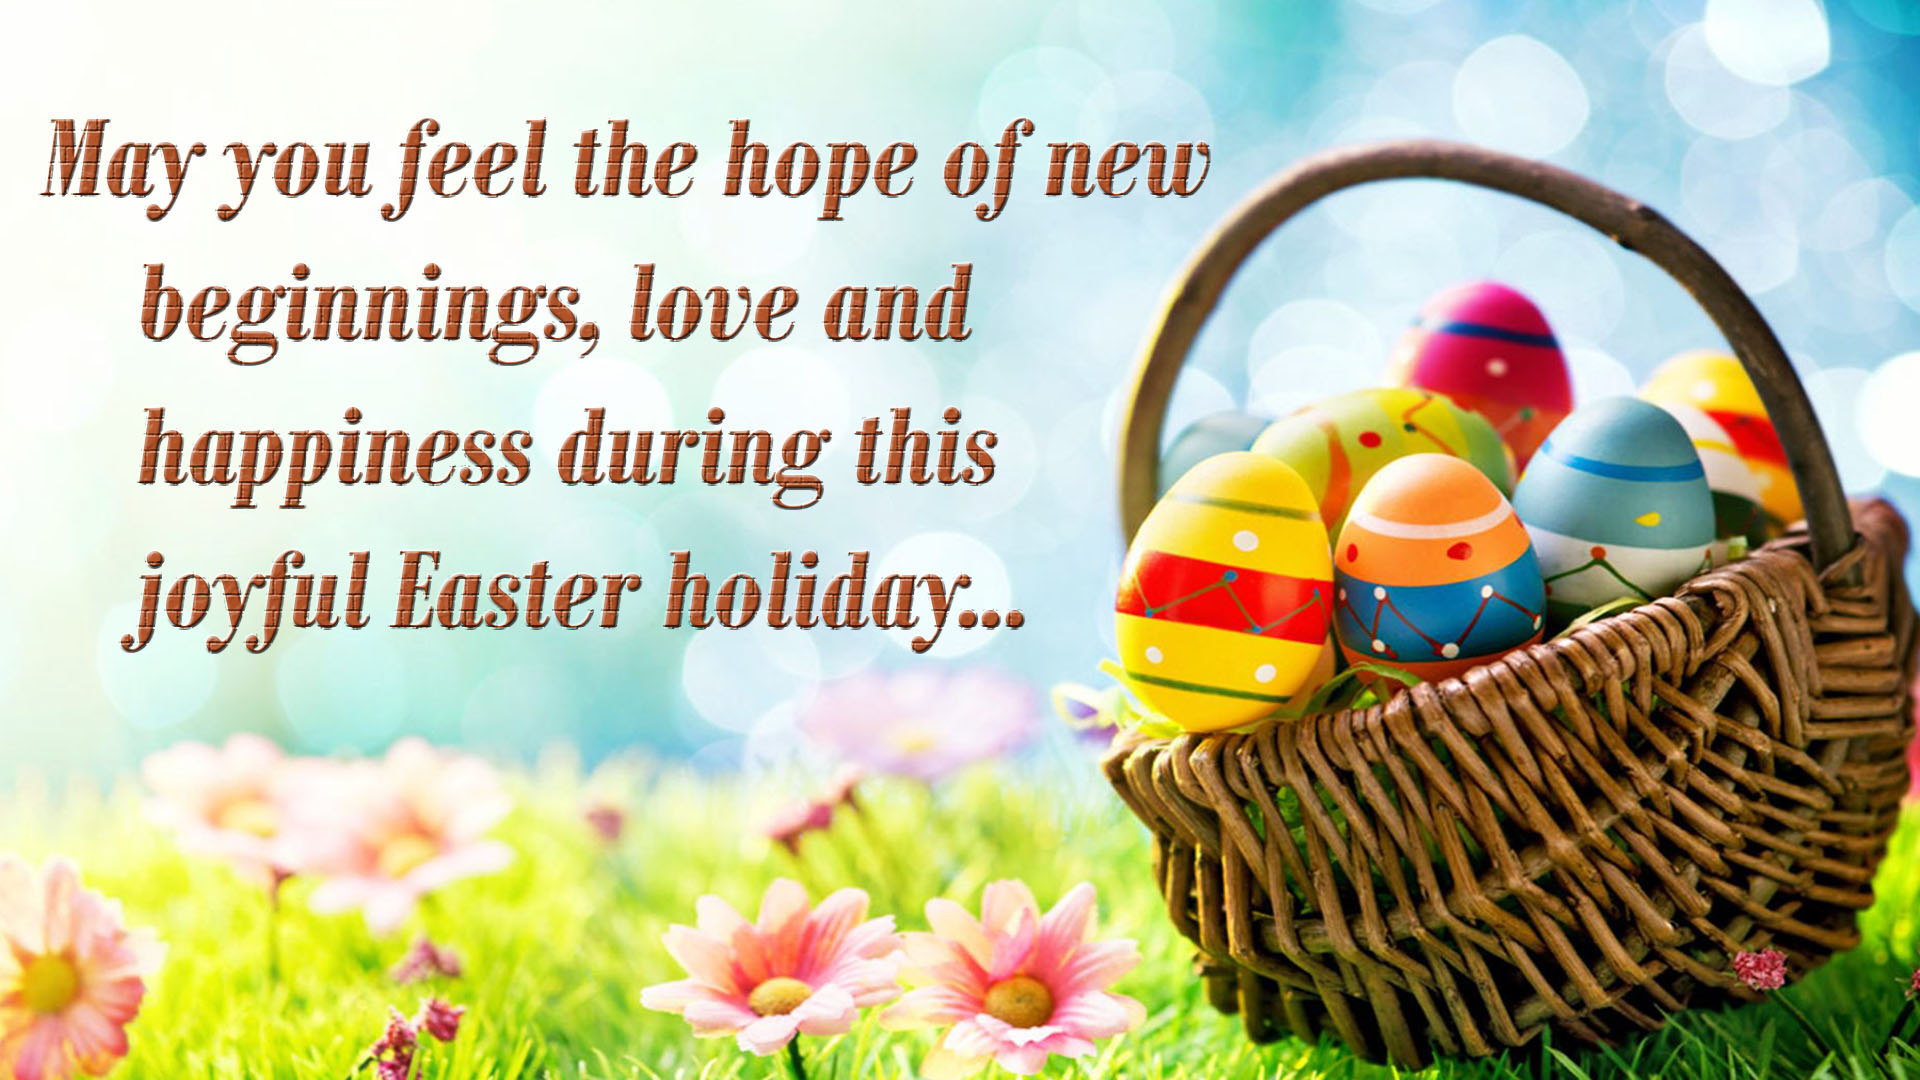 easter wishes image 2018